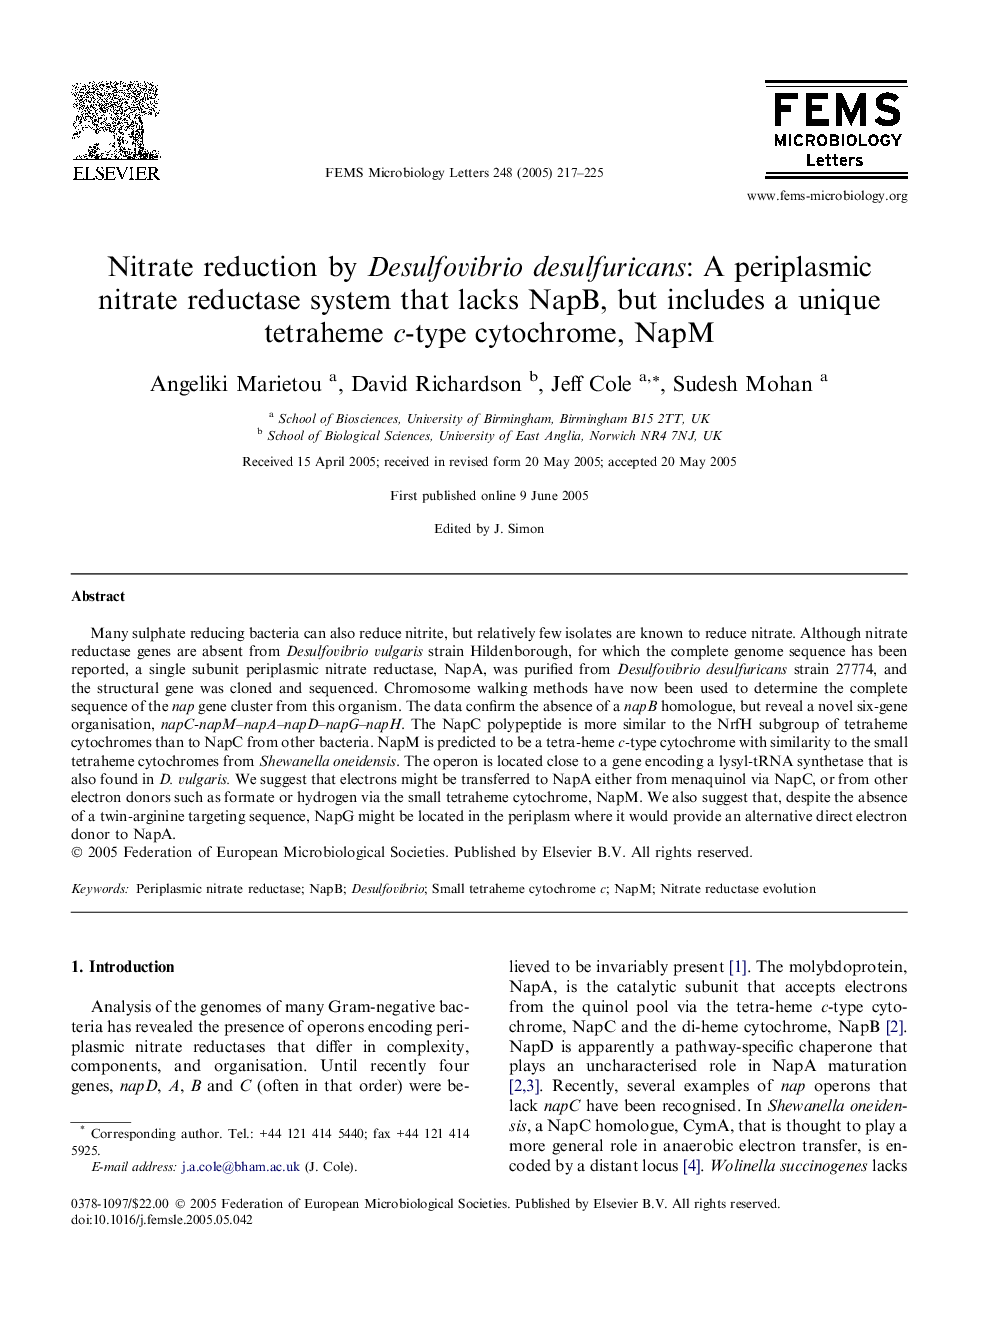 Nitrate reduction by Desulfovibrio desulfuricans: A periplasmic nitrate reductase system that lacks NapB, but includes a unique tetraheme c-type cytochrome, NapM